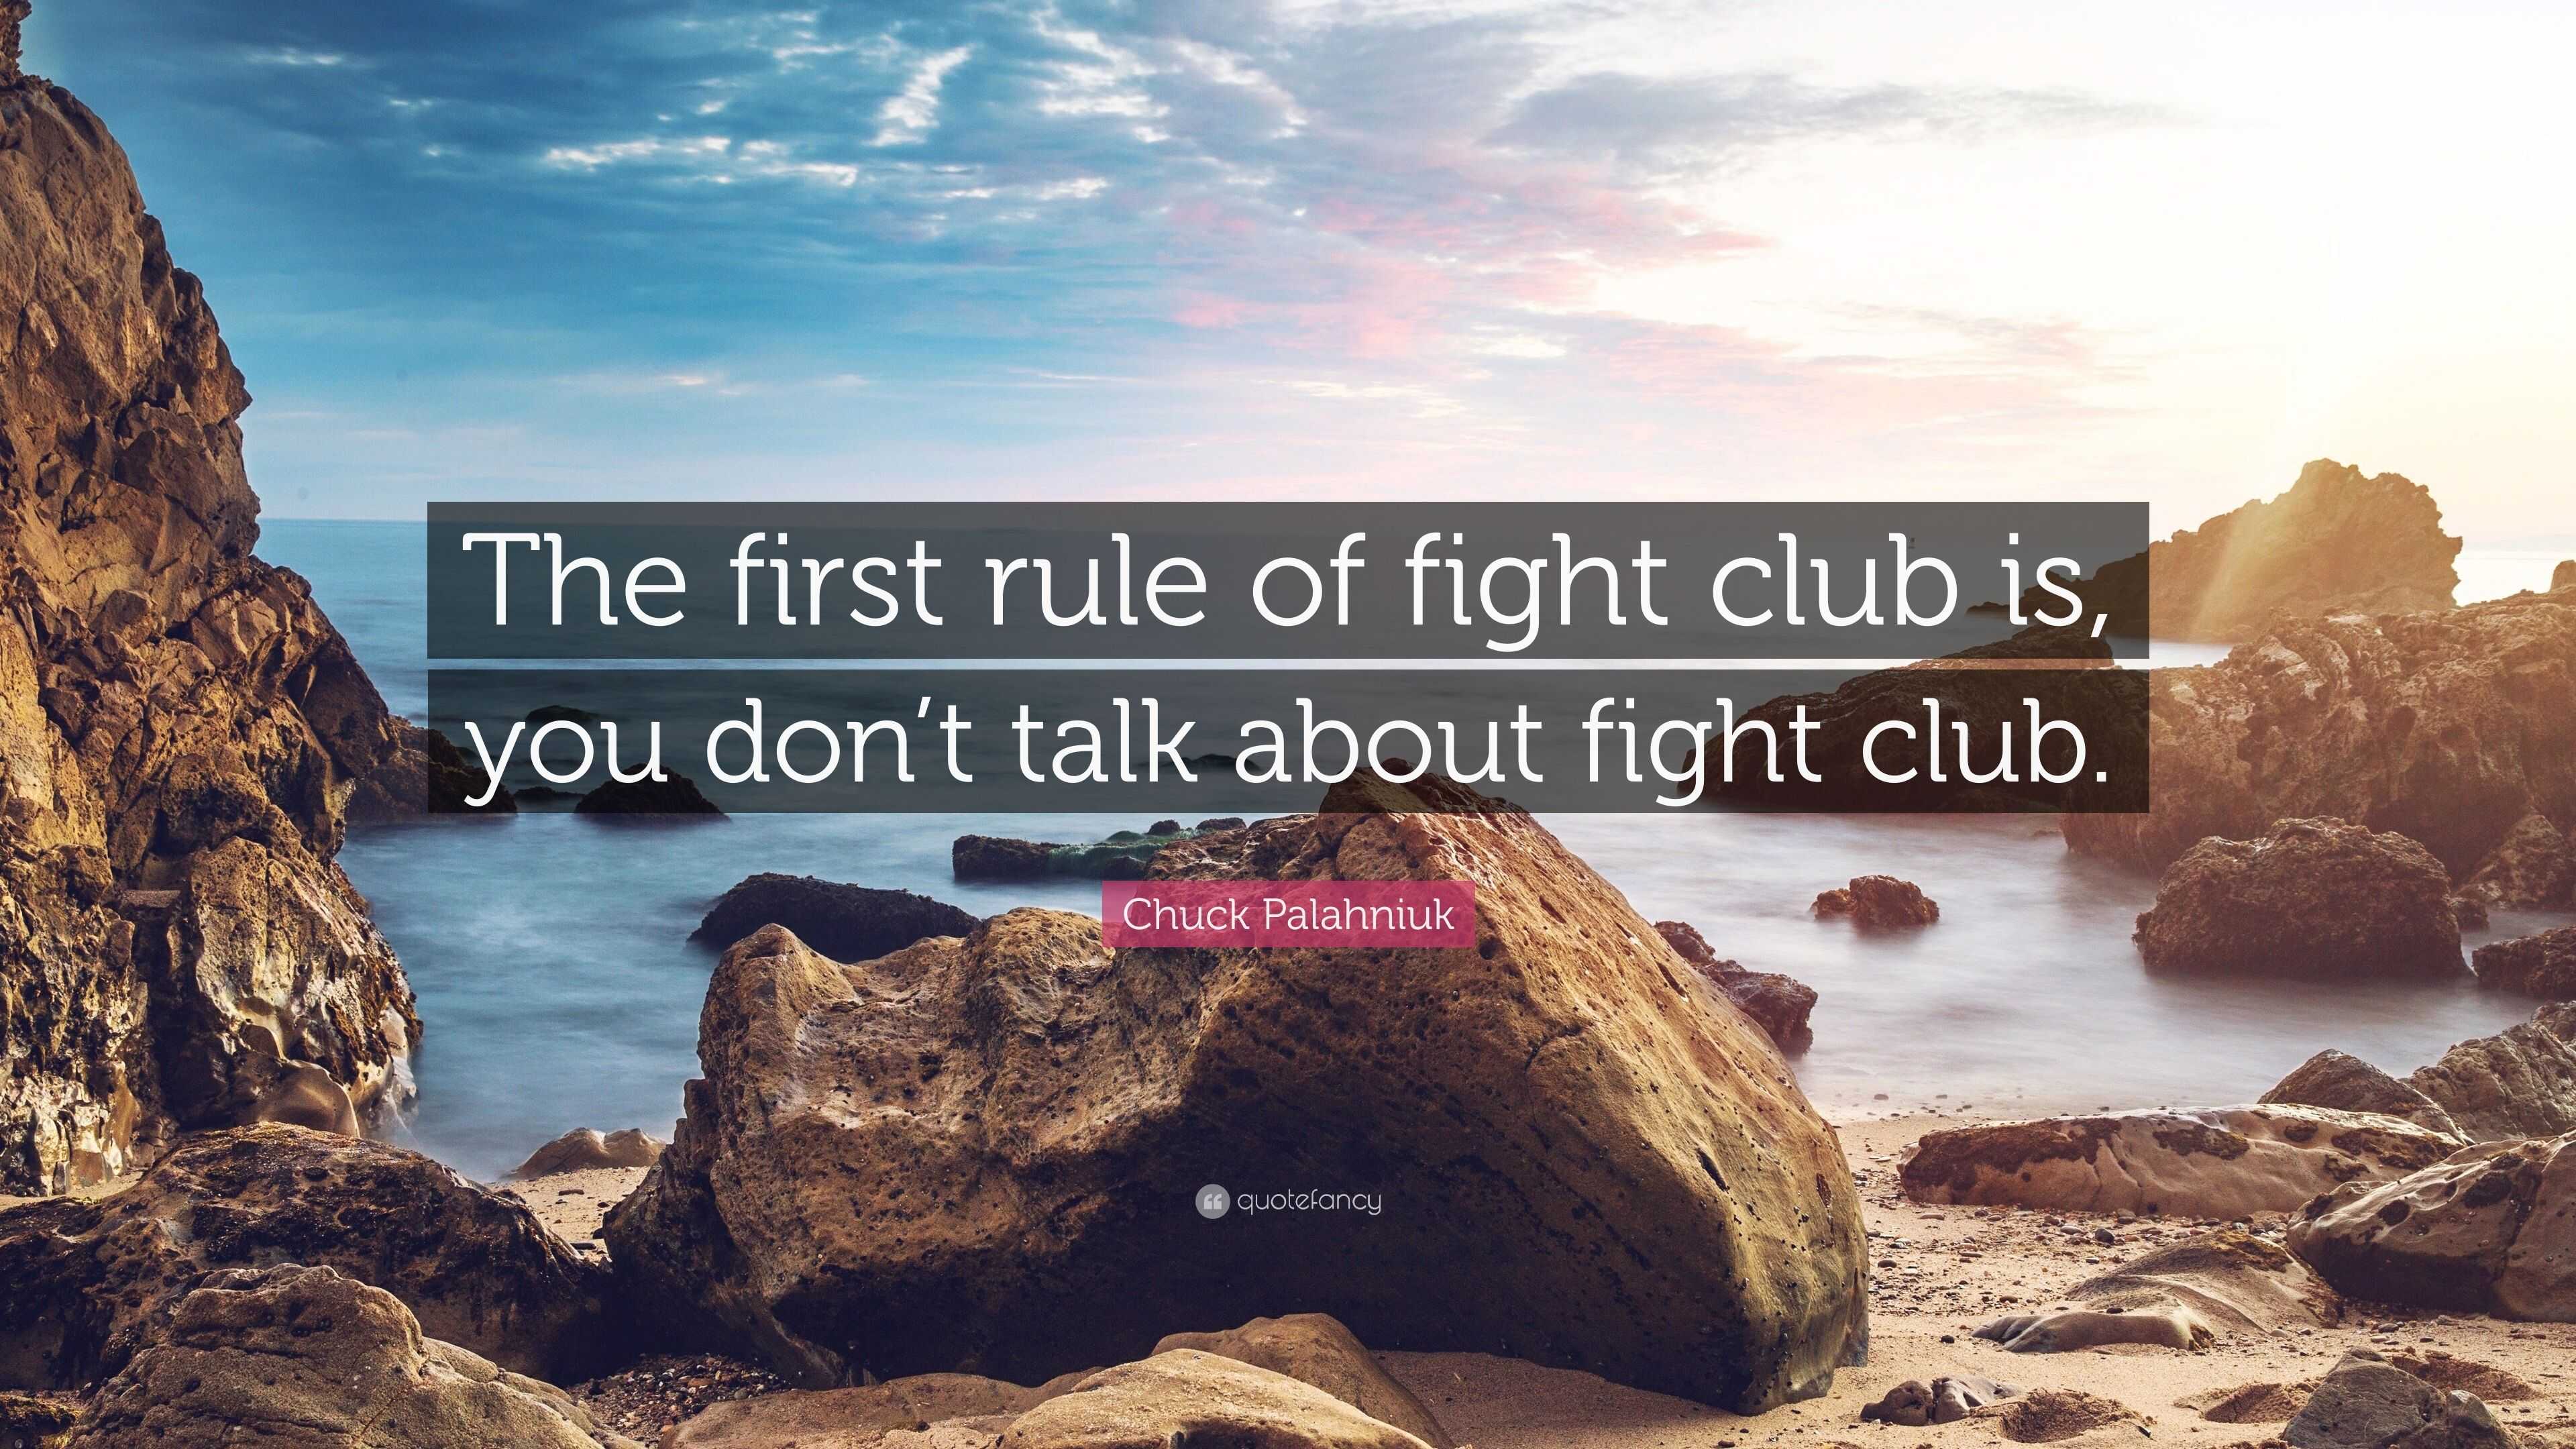 Chuck Palahniuk Quote: “The first rule of fight club is, you don’t talk ...